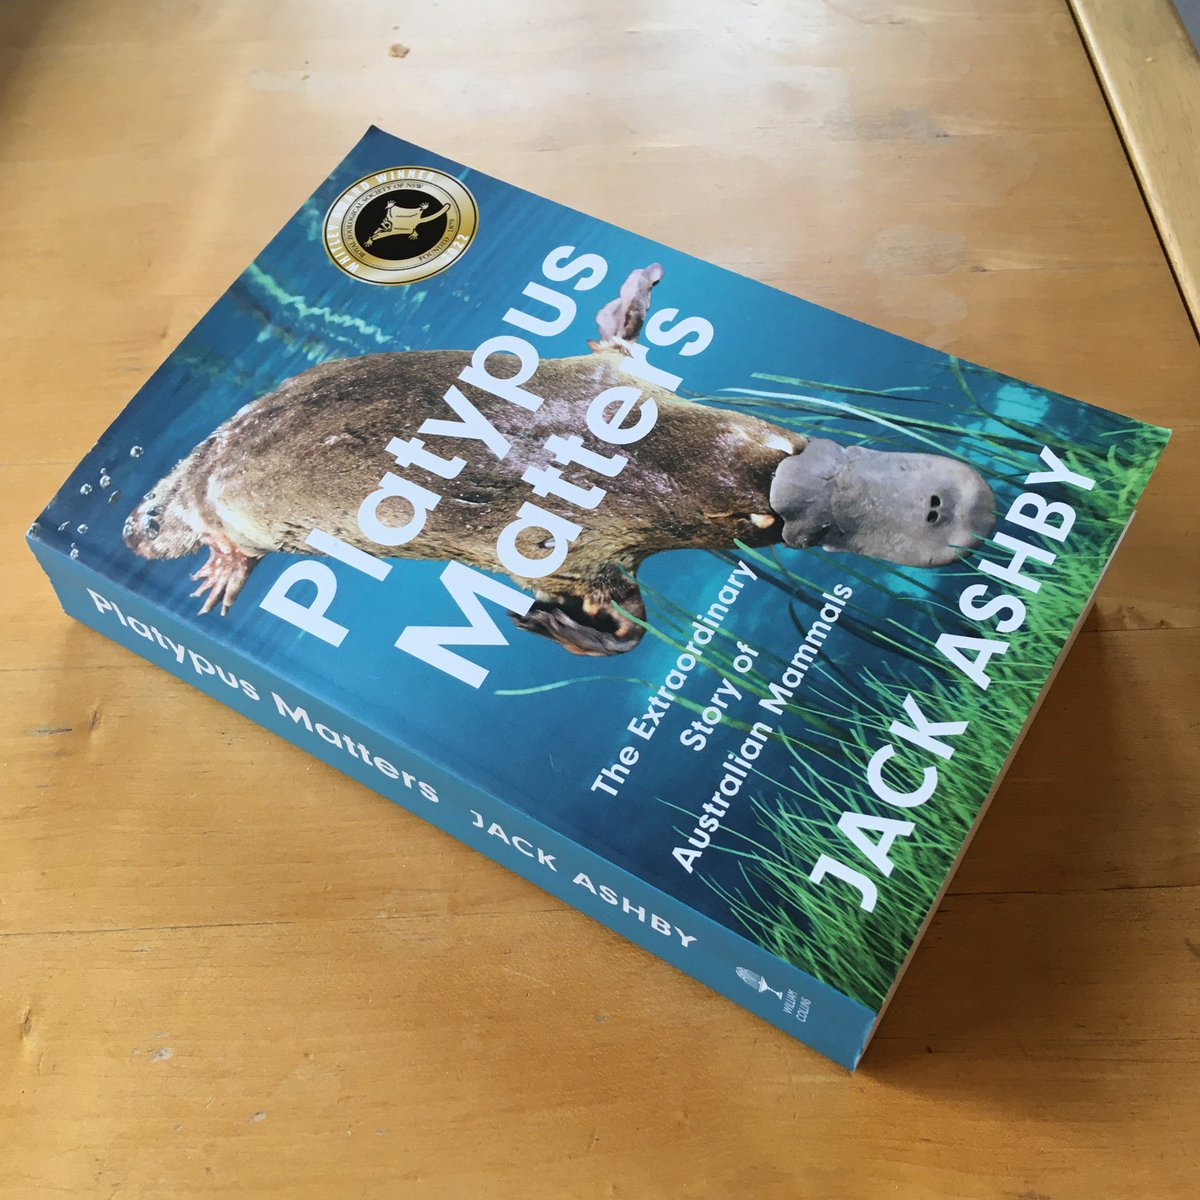 @JackDAshby Just starting to read my copy and already engrossed.

#PlatypusMatters

(Sent a link to my dad when he asked what I wanted for Christmas and he duly obliged!)